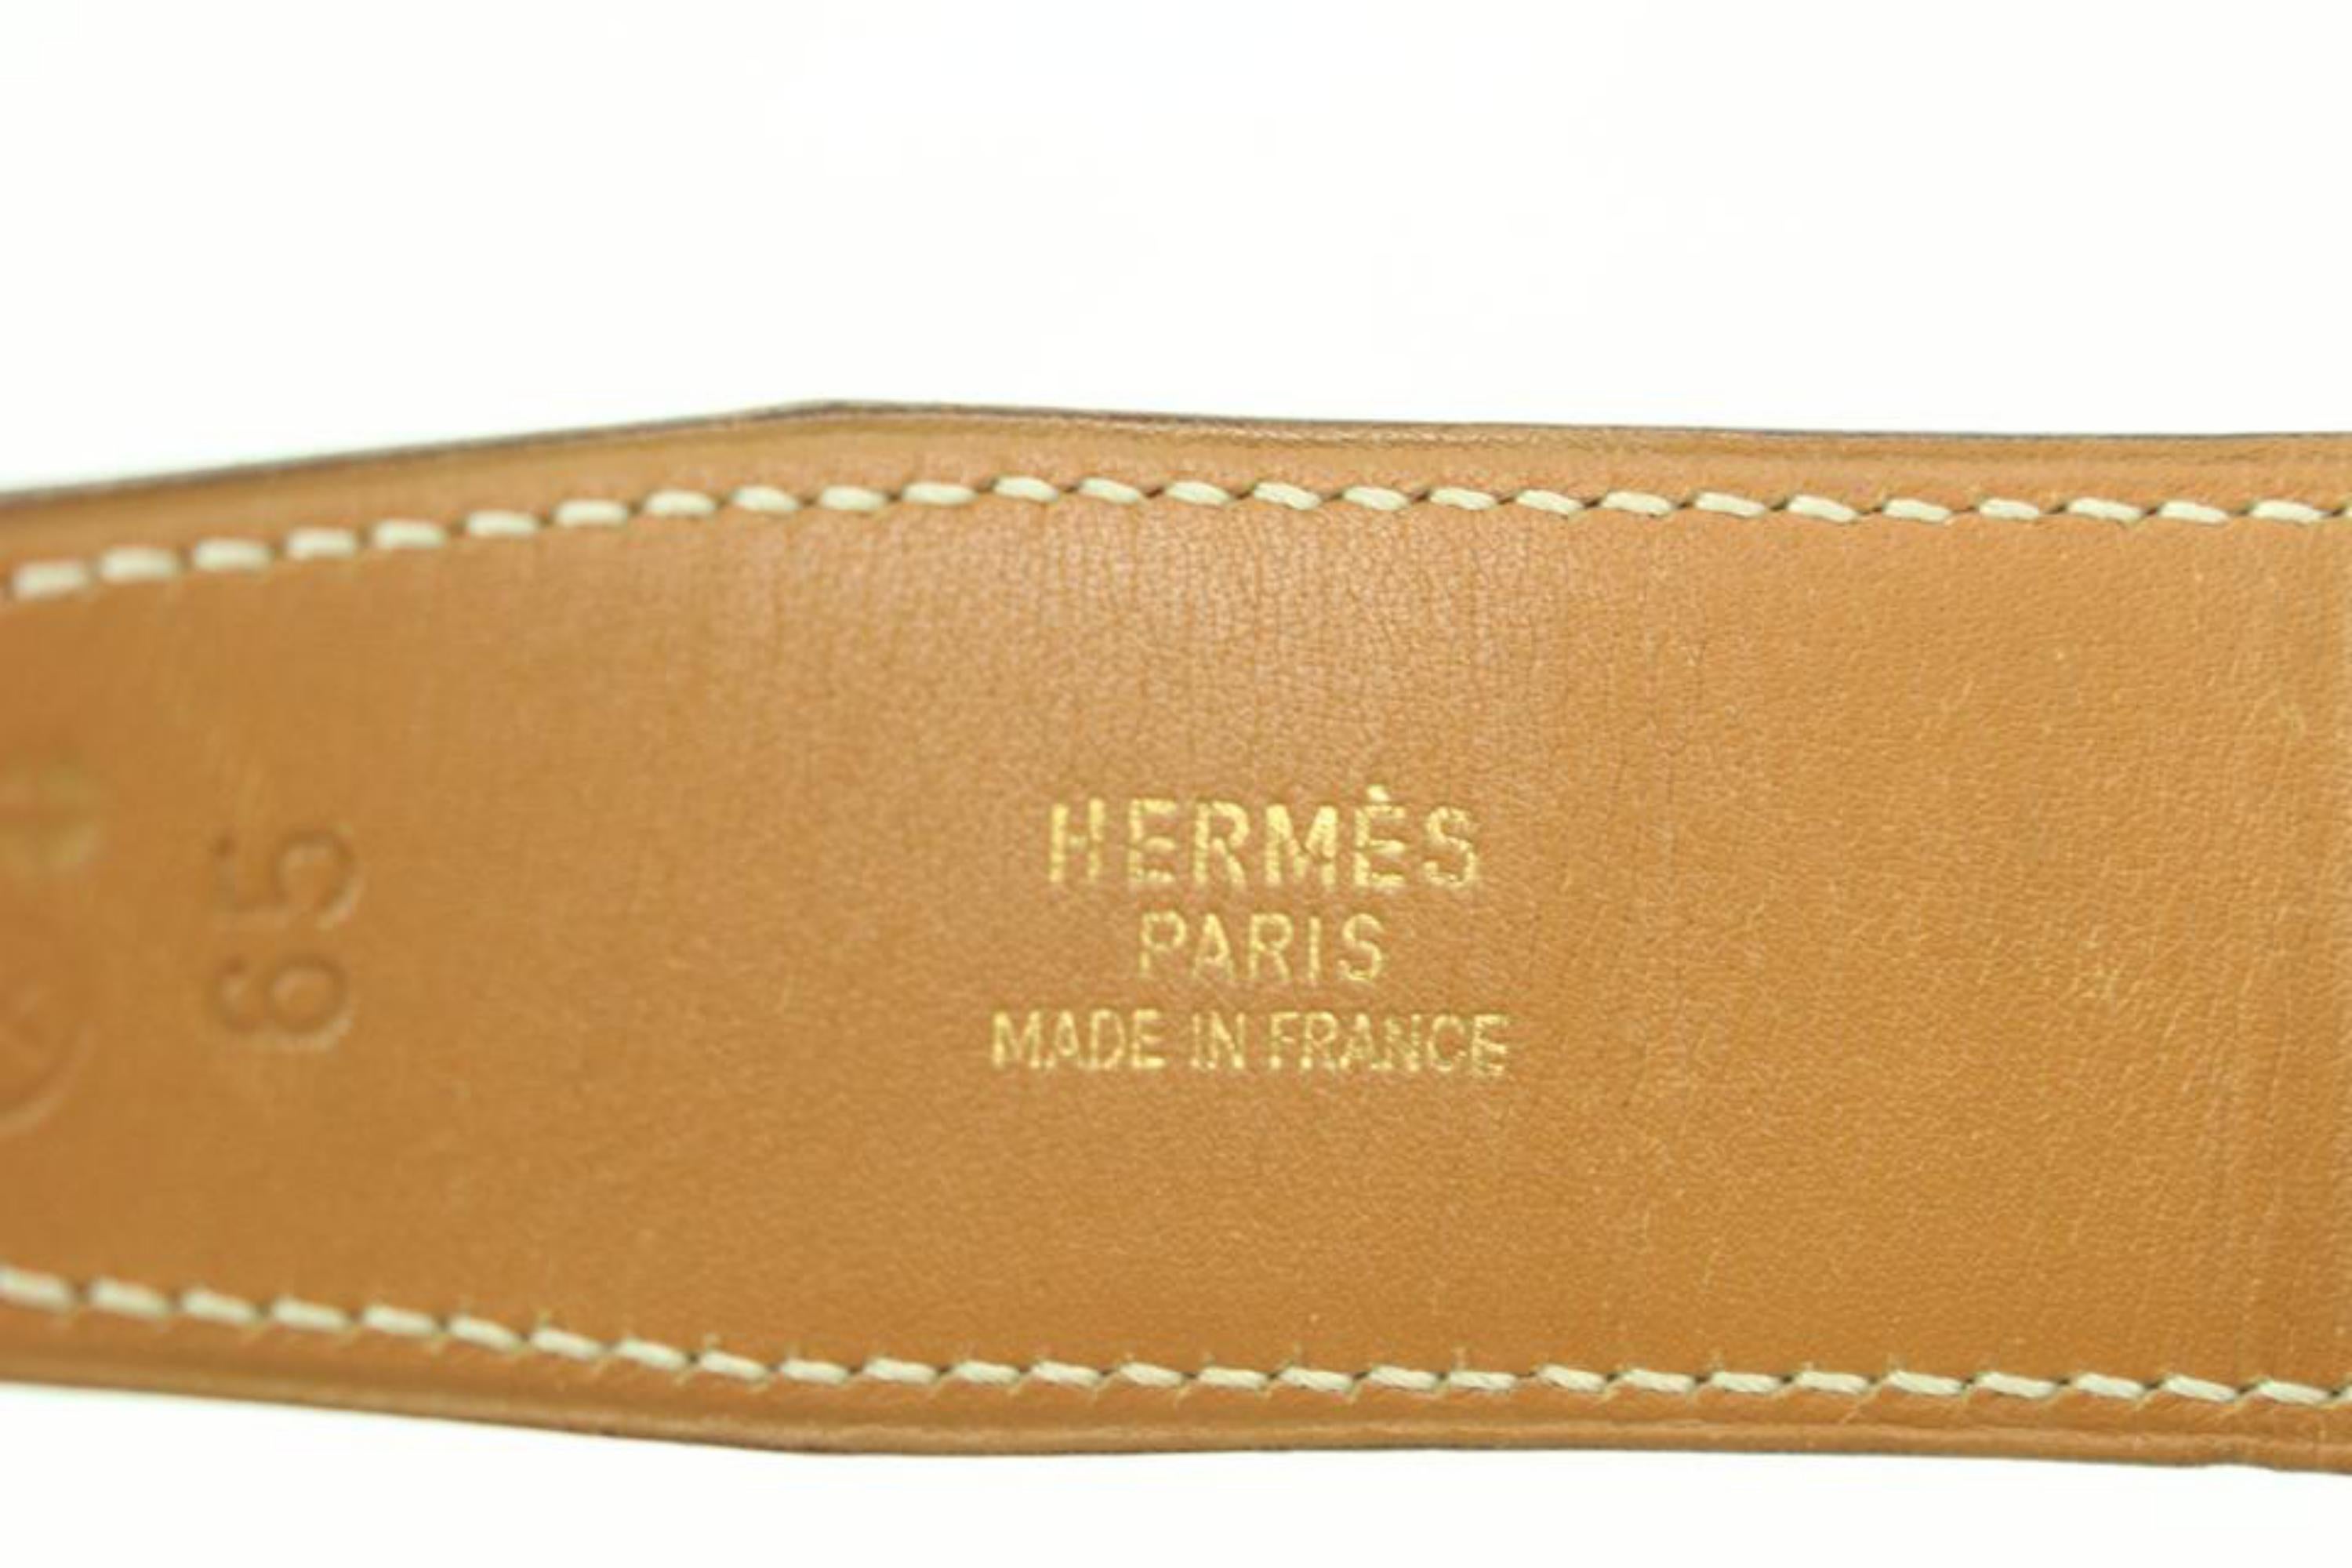 Hermès Black x Brown x Gold 32mm Reversible H Logo Belt Kit s331h52
Date Code/Serial Number: X in a Circle
Made In: France
Measurements: Length:  31.5